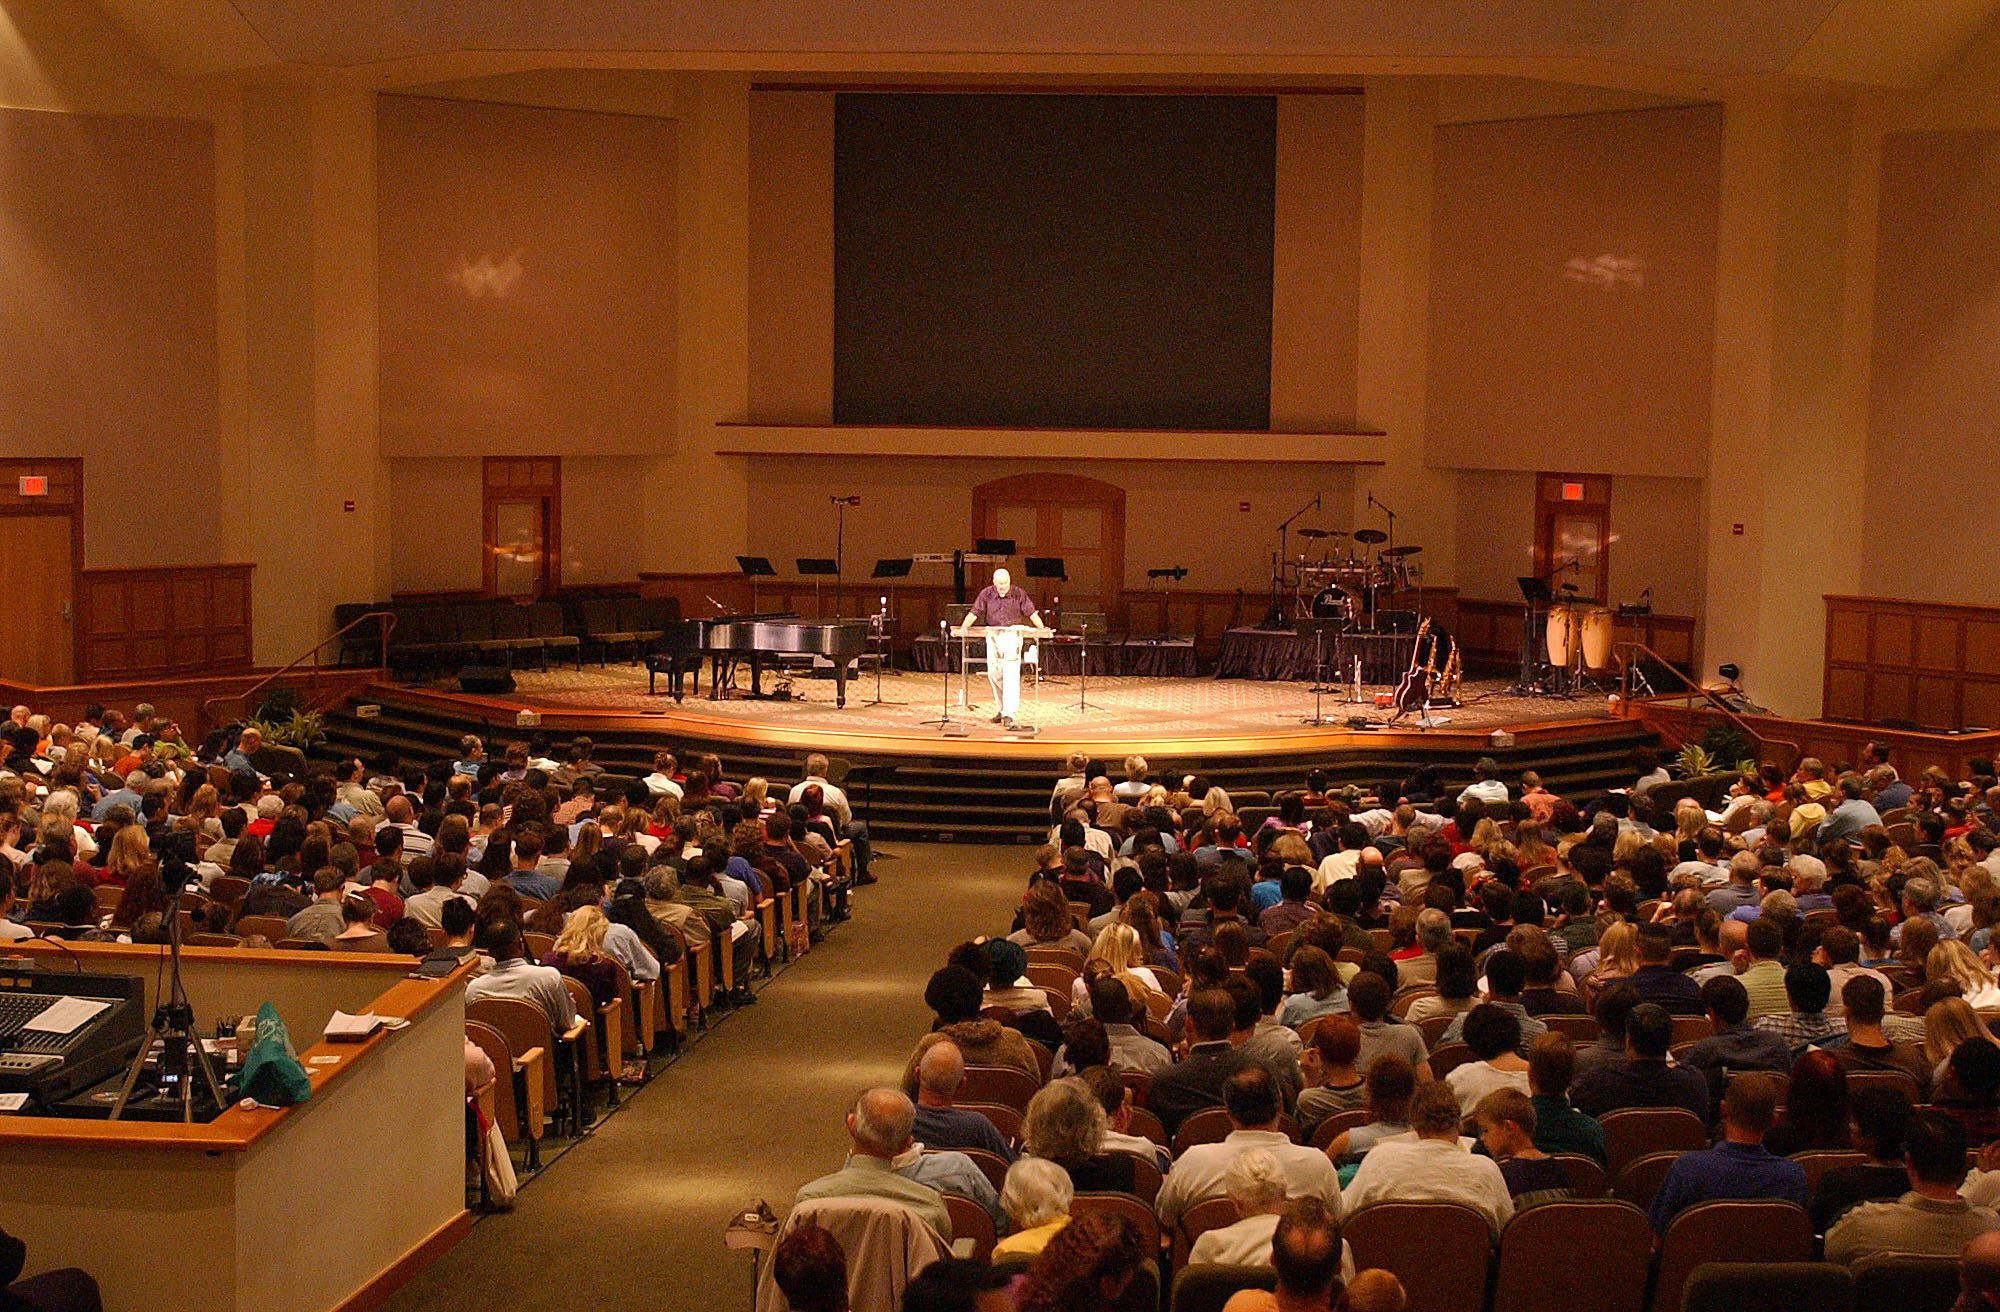 Worshipers fill the Covenant Life Church in Gaithersburg, Md. on Oct. 13, 2002.